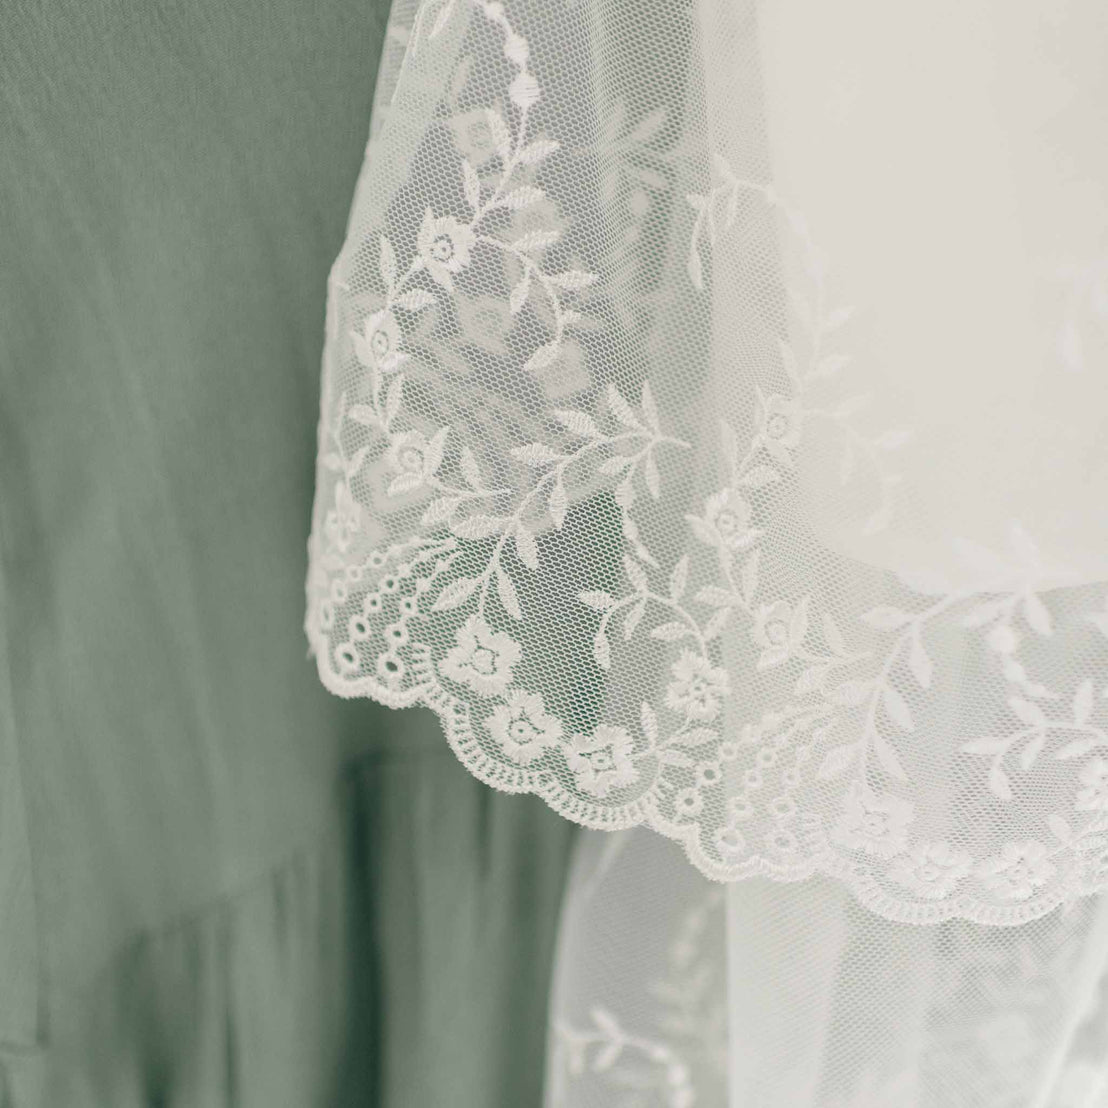 A close-up image of the lace on the Ella Christening Gown's skirt. The skirt features intricate floral embroidered netting lace details.